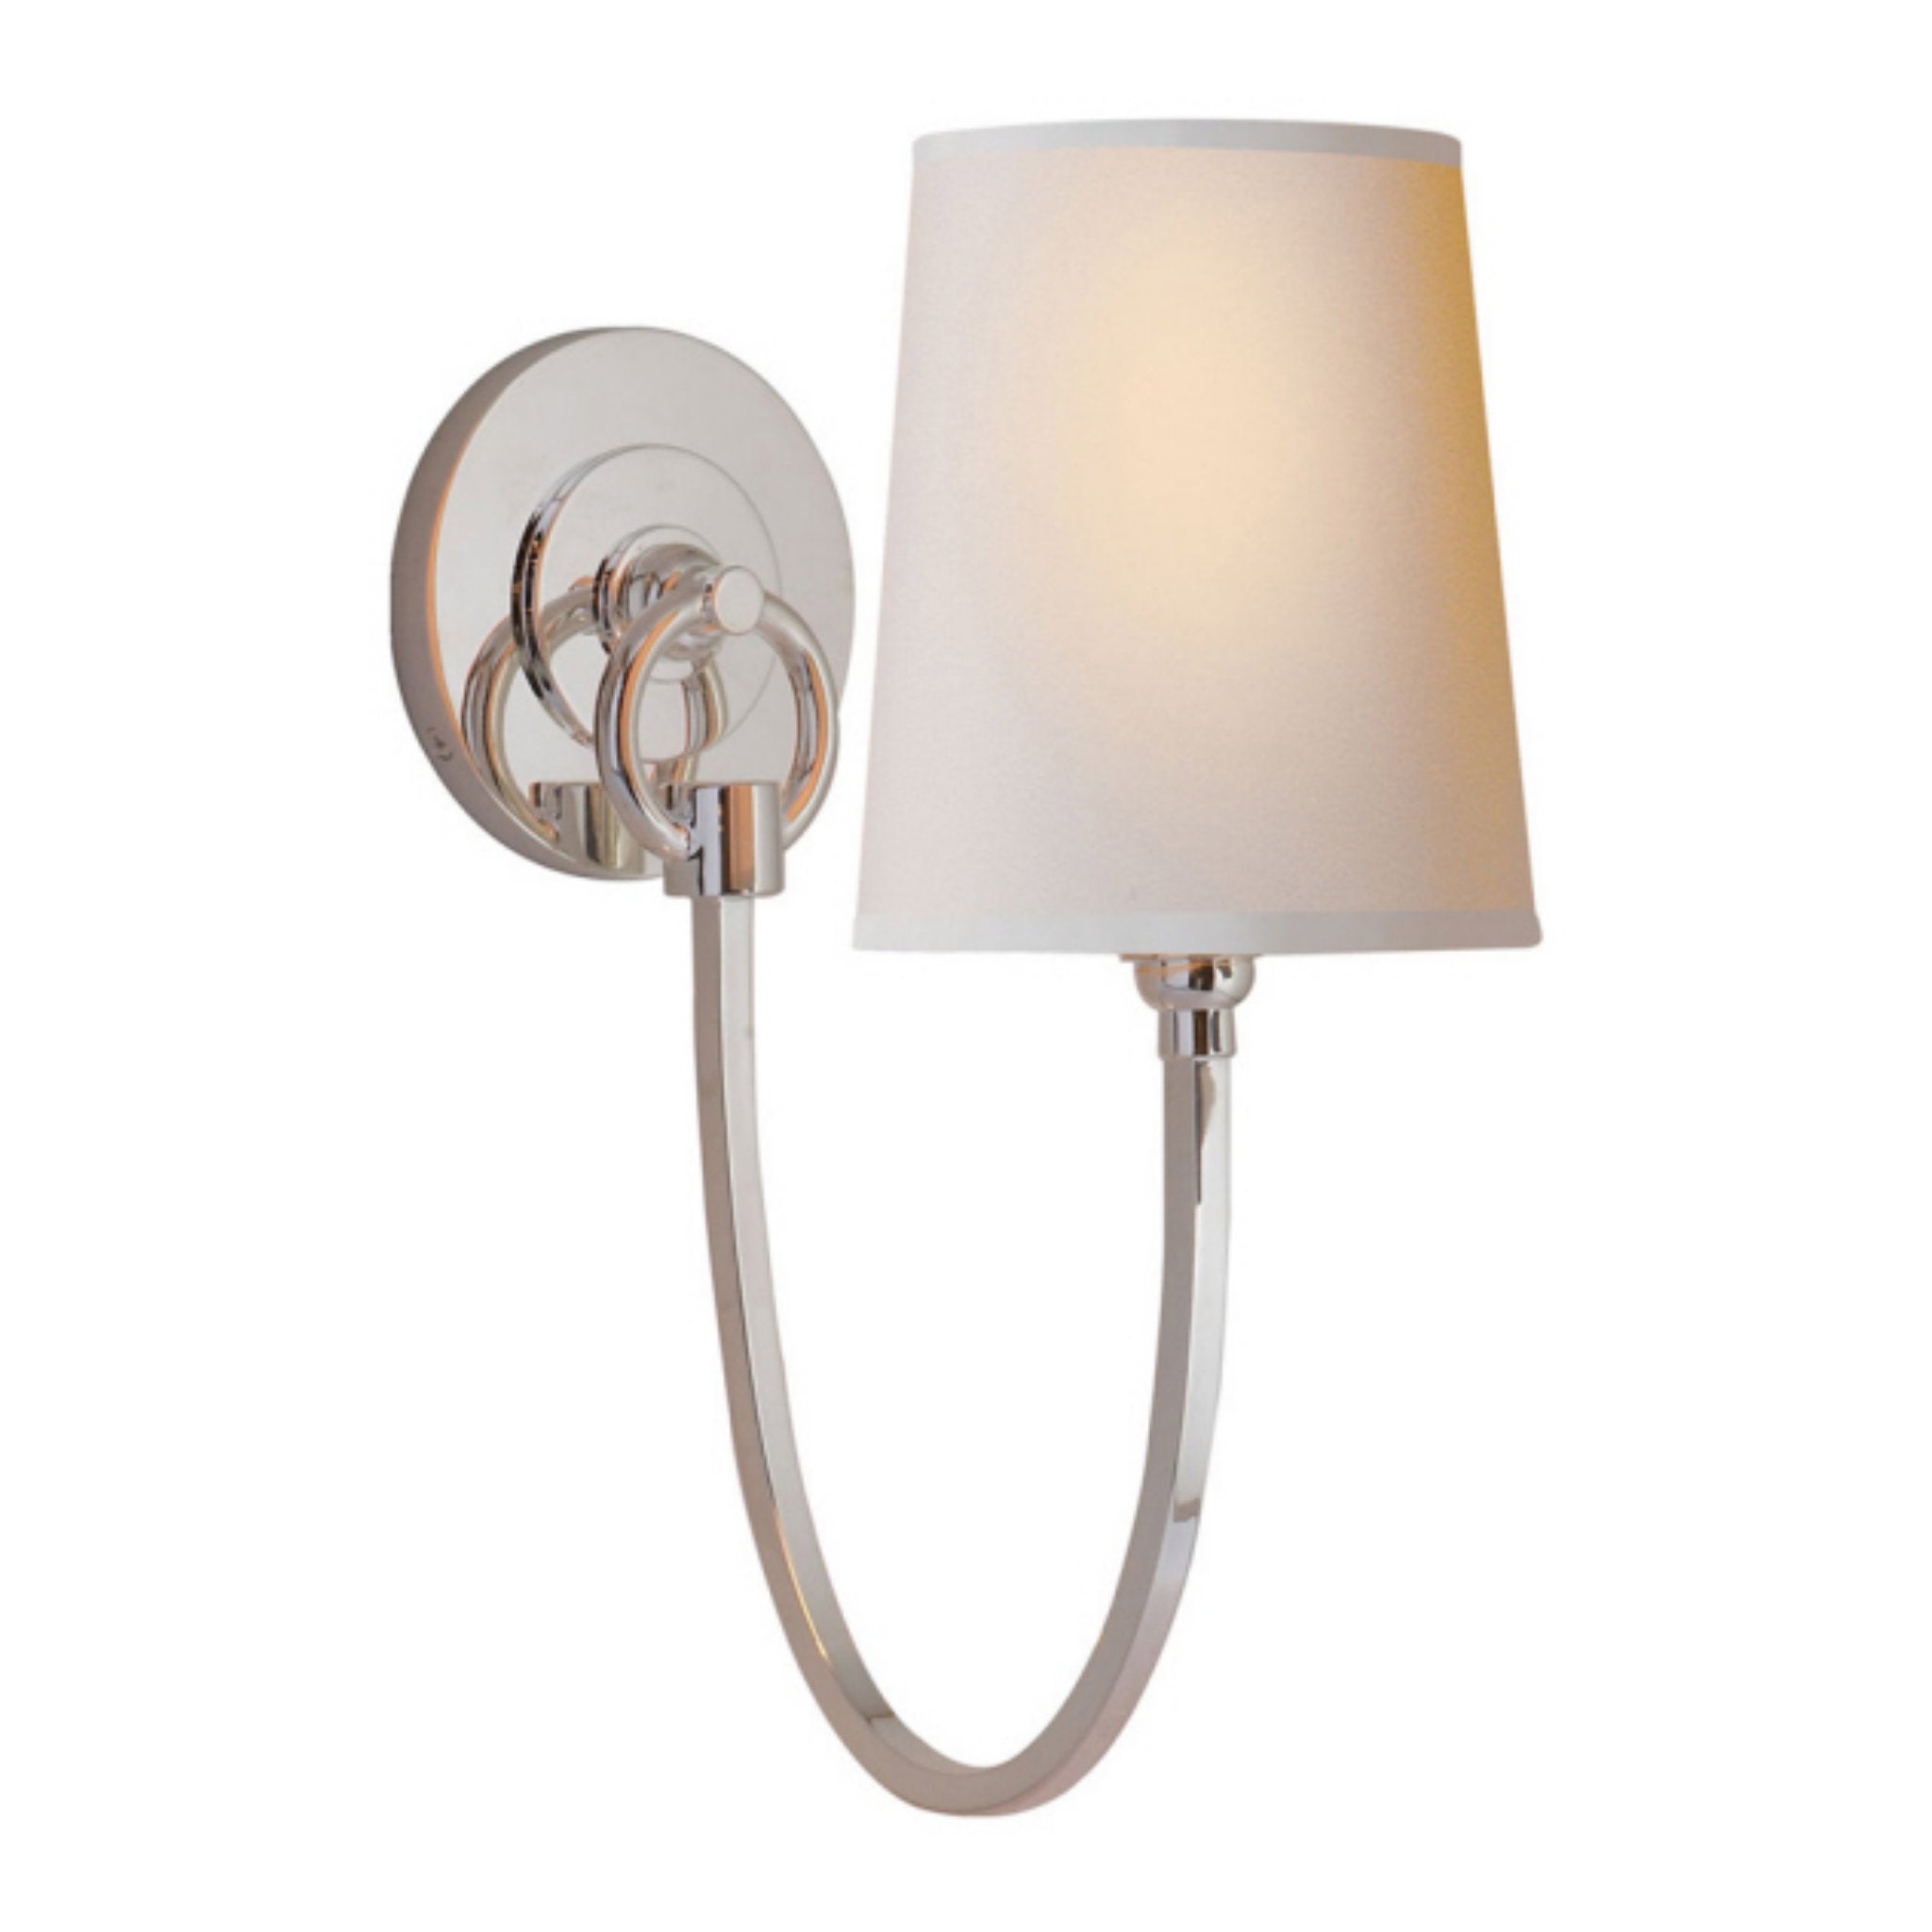 Thomas O'Brien Reed Single Sconce in Polished Nickel with Natural Paper Shade